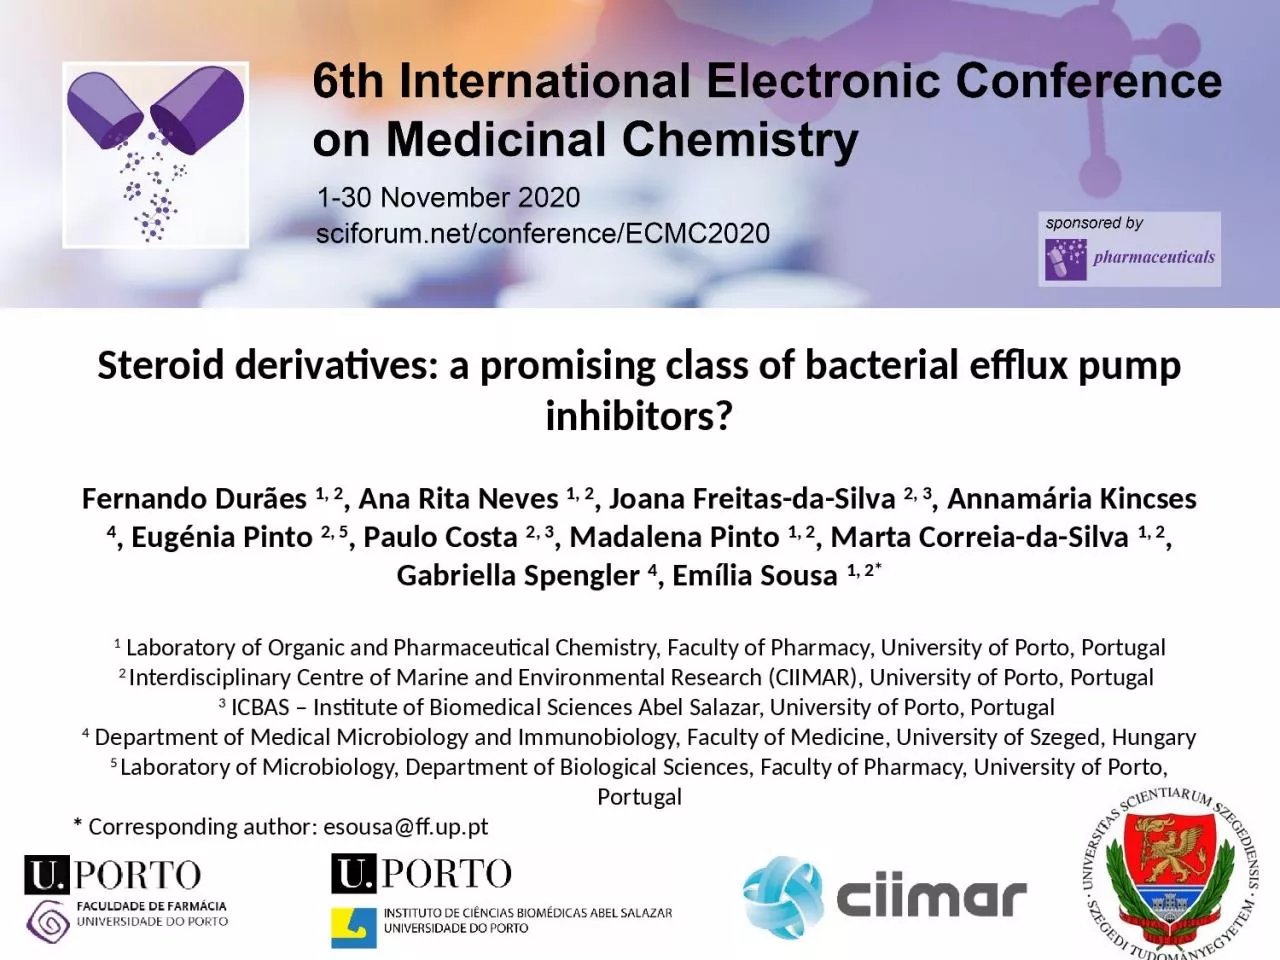 Steroid derivatives: a promising class of bacterial efflux pump inhibitors?